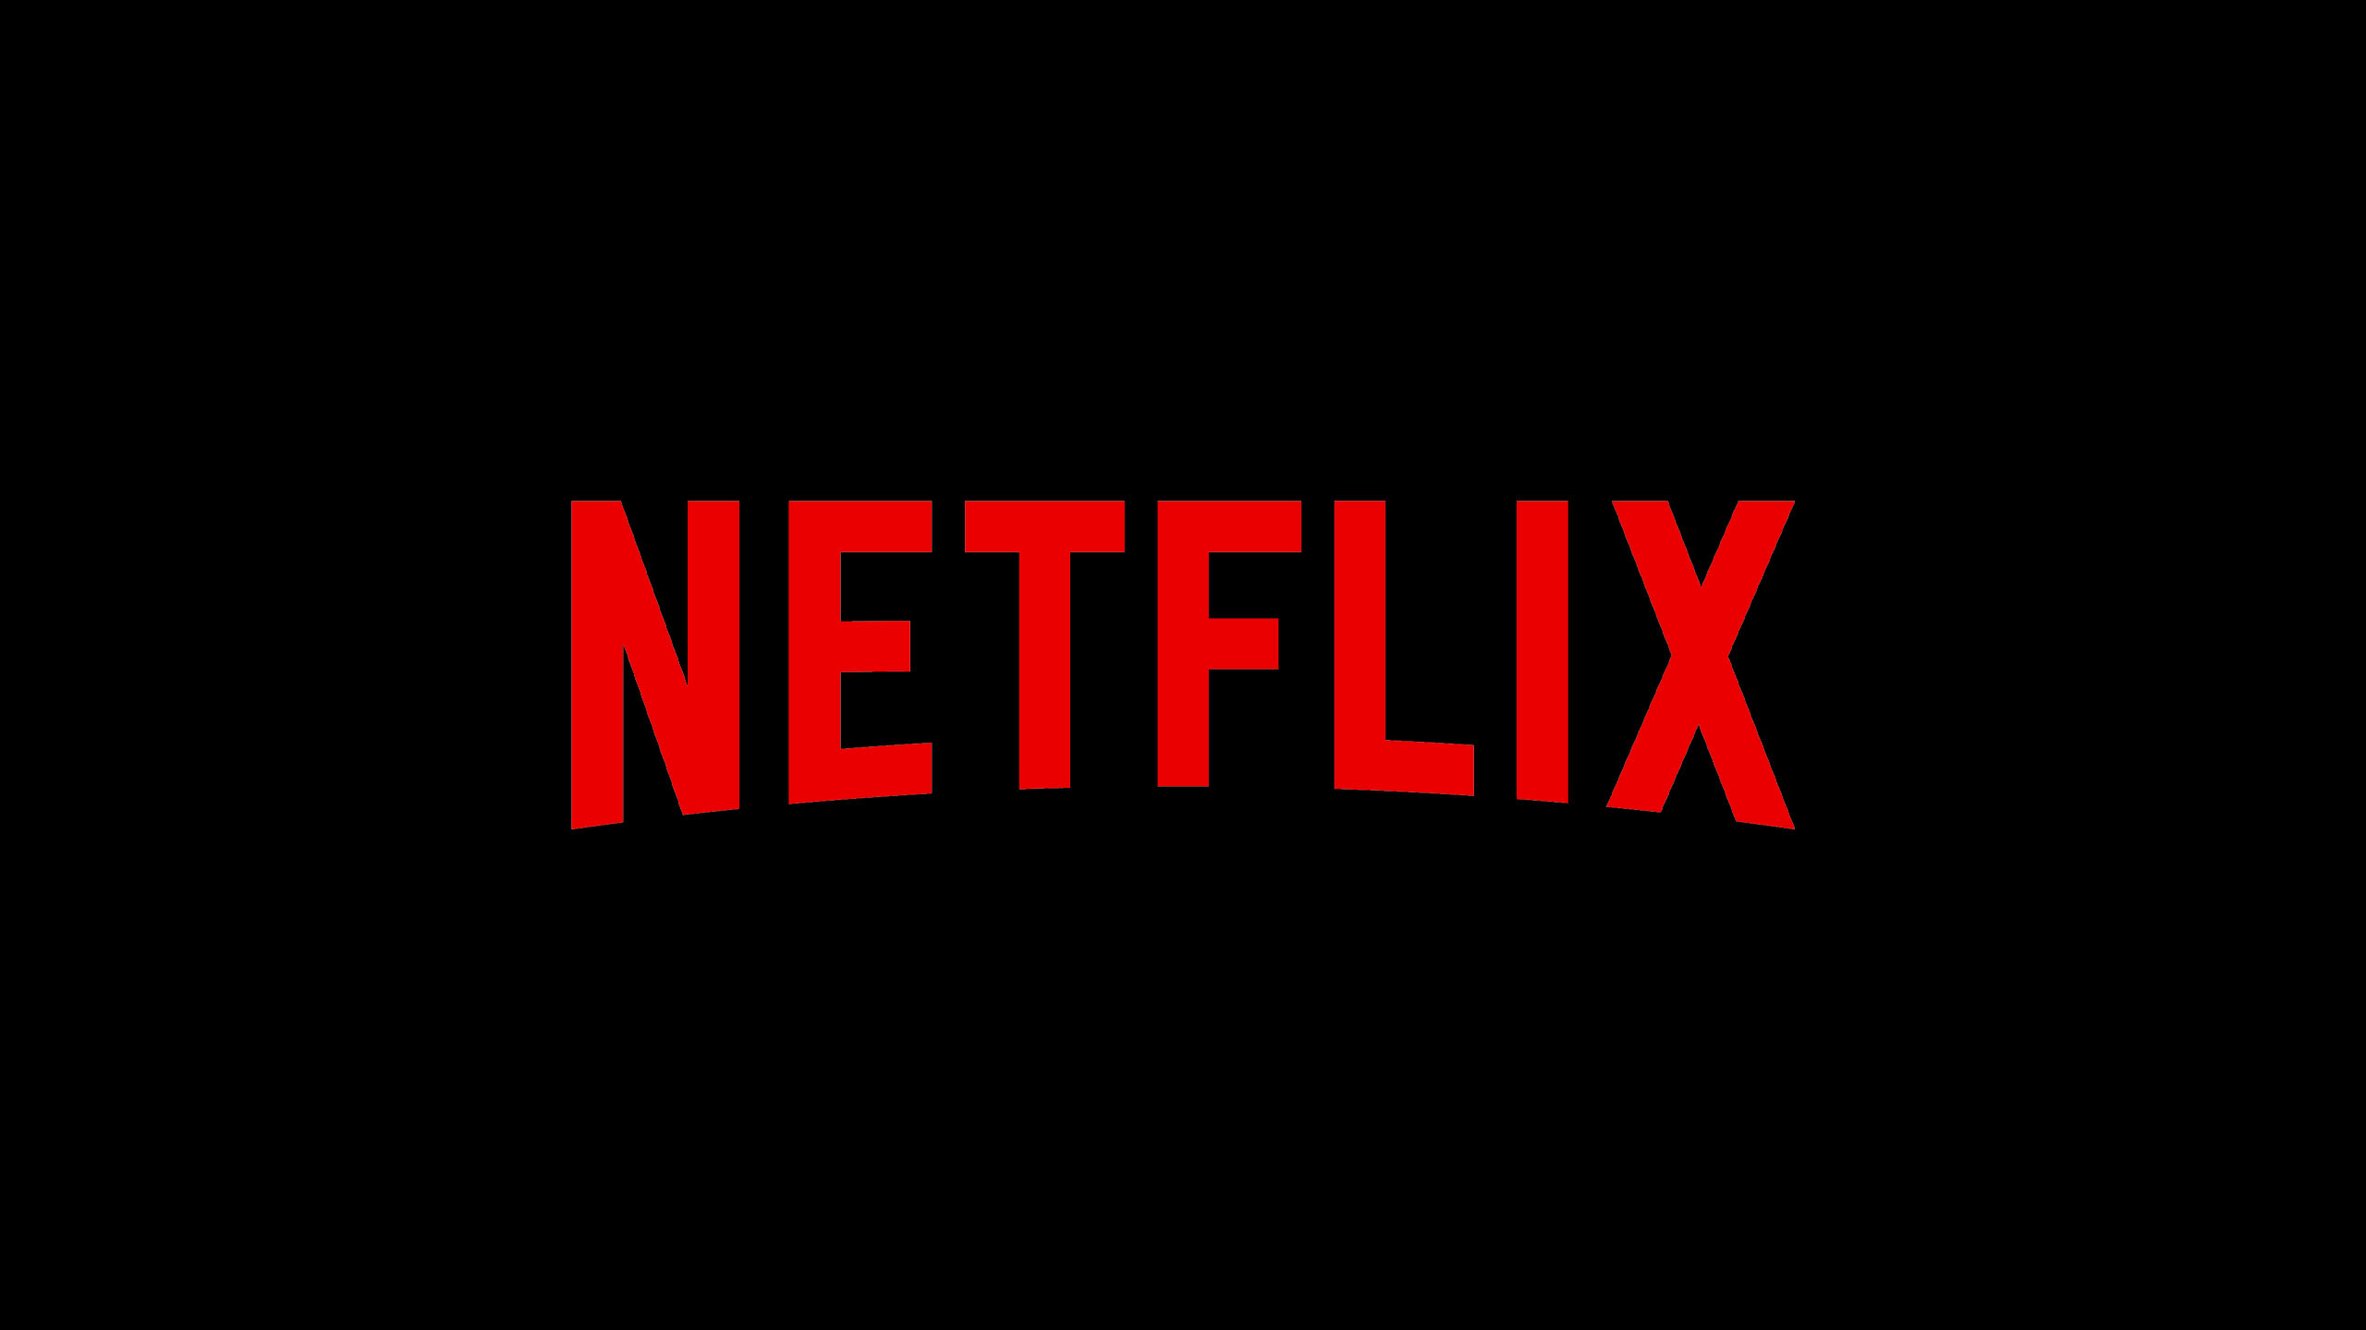 Netflix Casting Lead Roles for a New Show